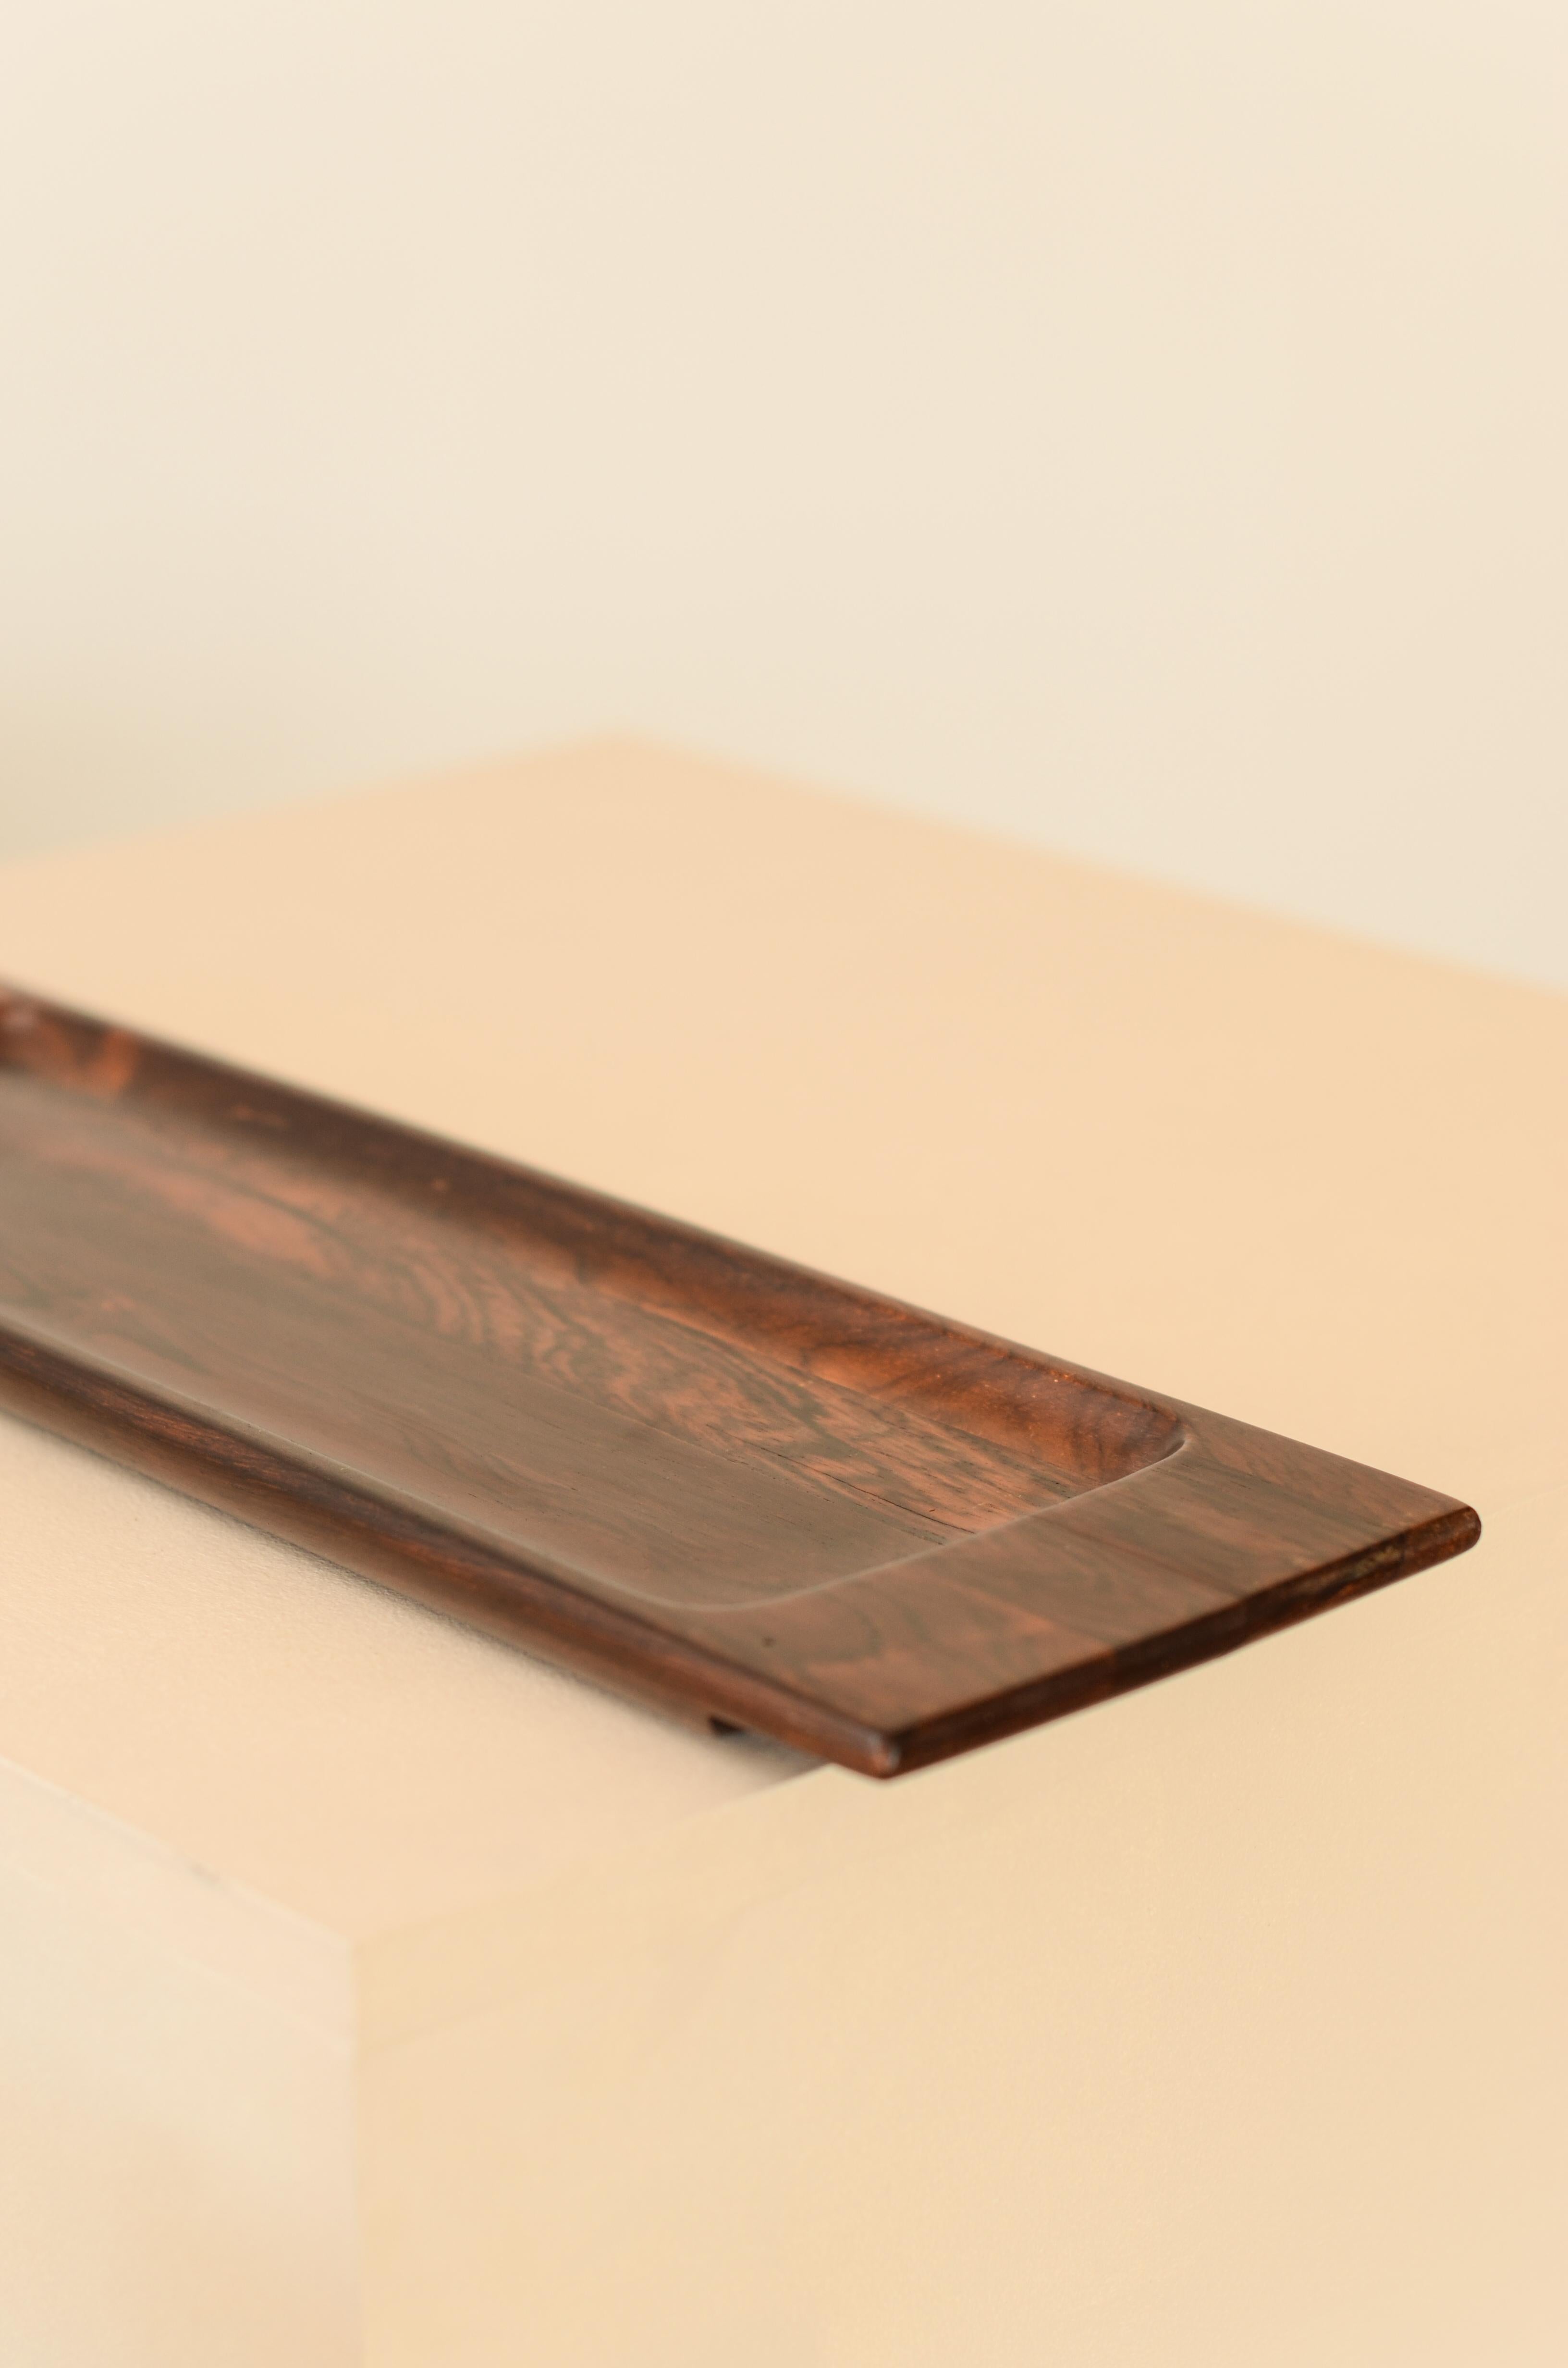 Mid-Century Modern Brazilian Midcentury Tray #701 in Rosewood by Jean Gillon for WoodArt For Sale